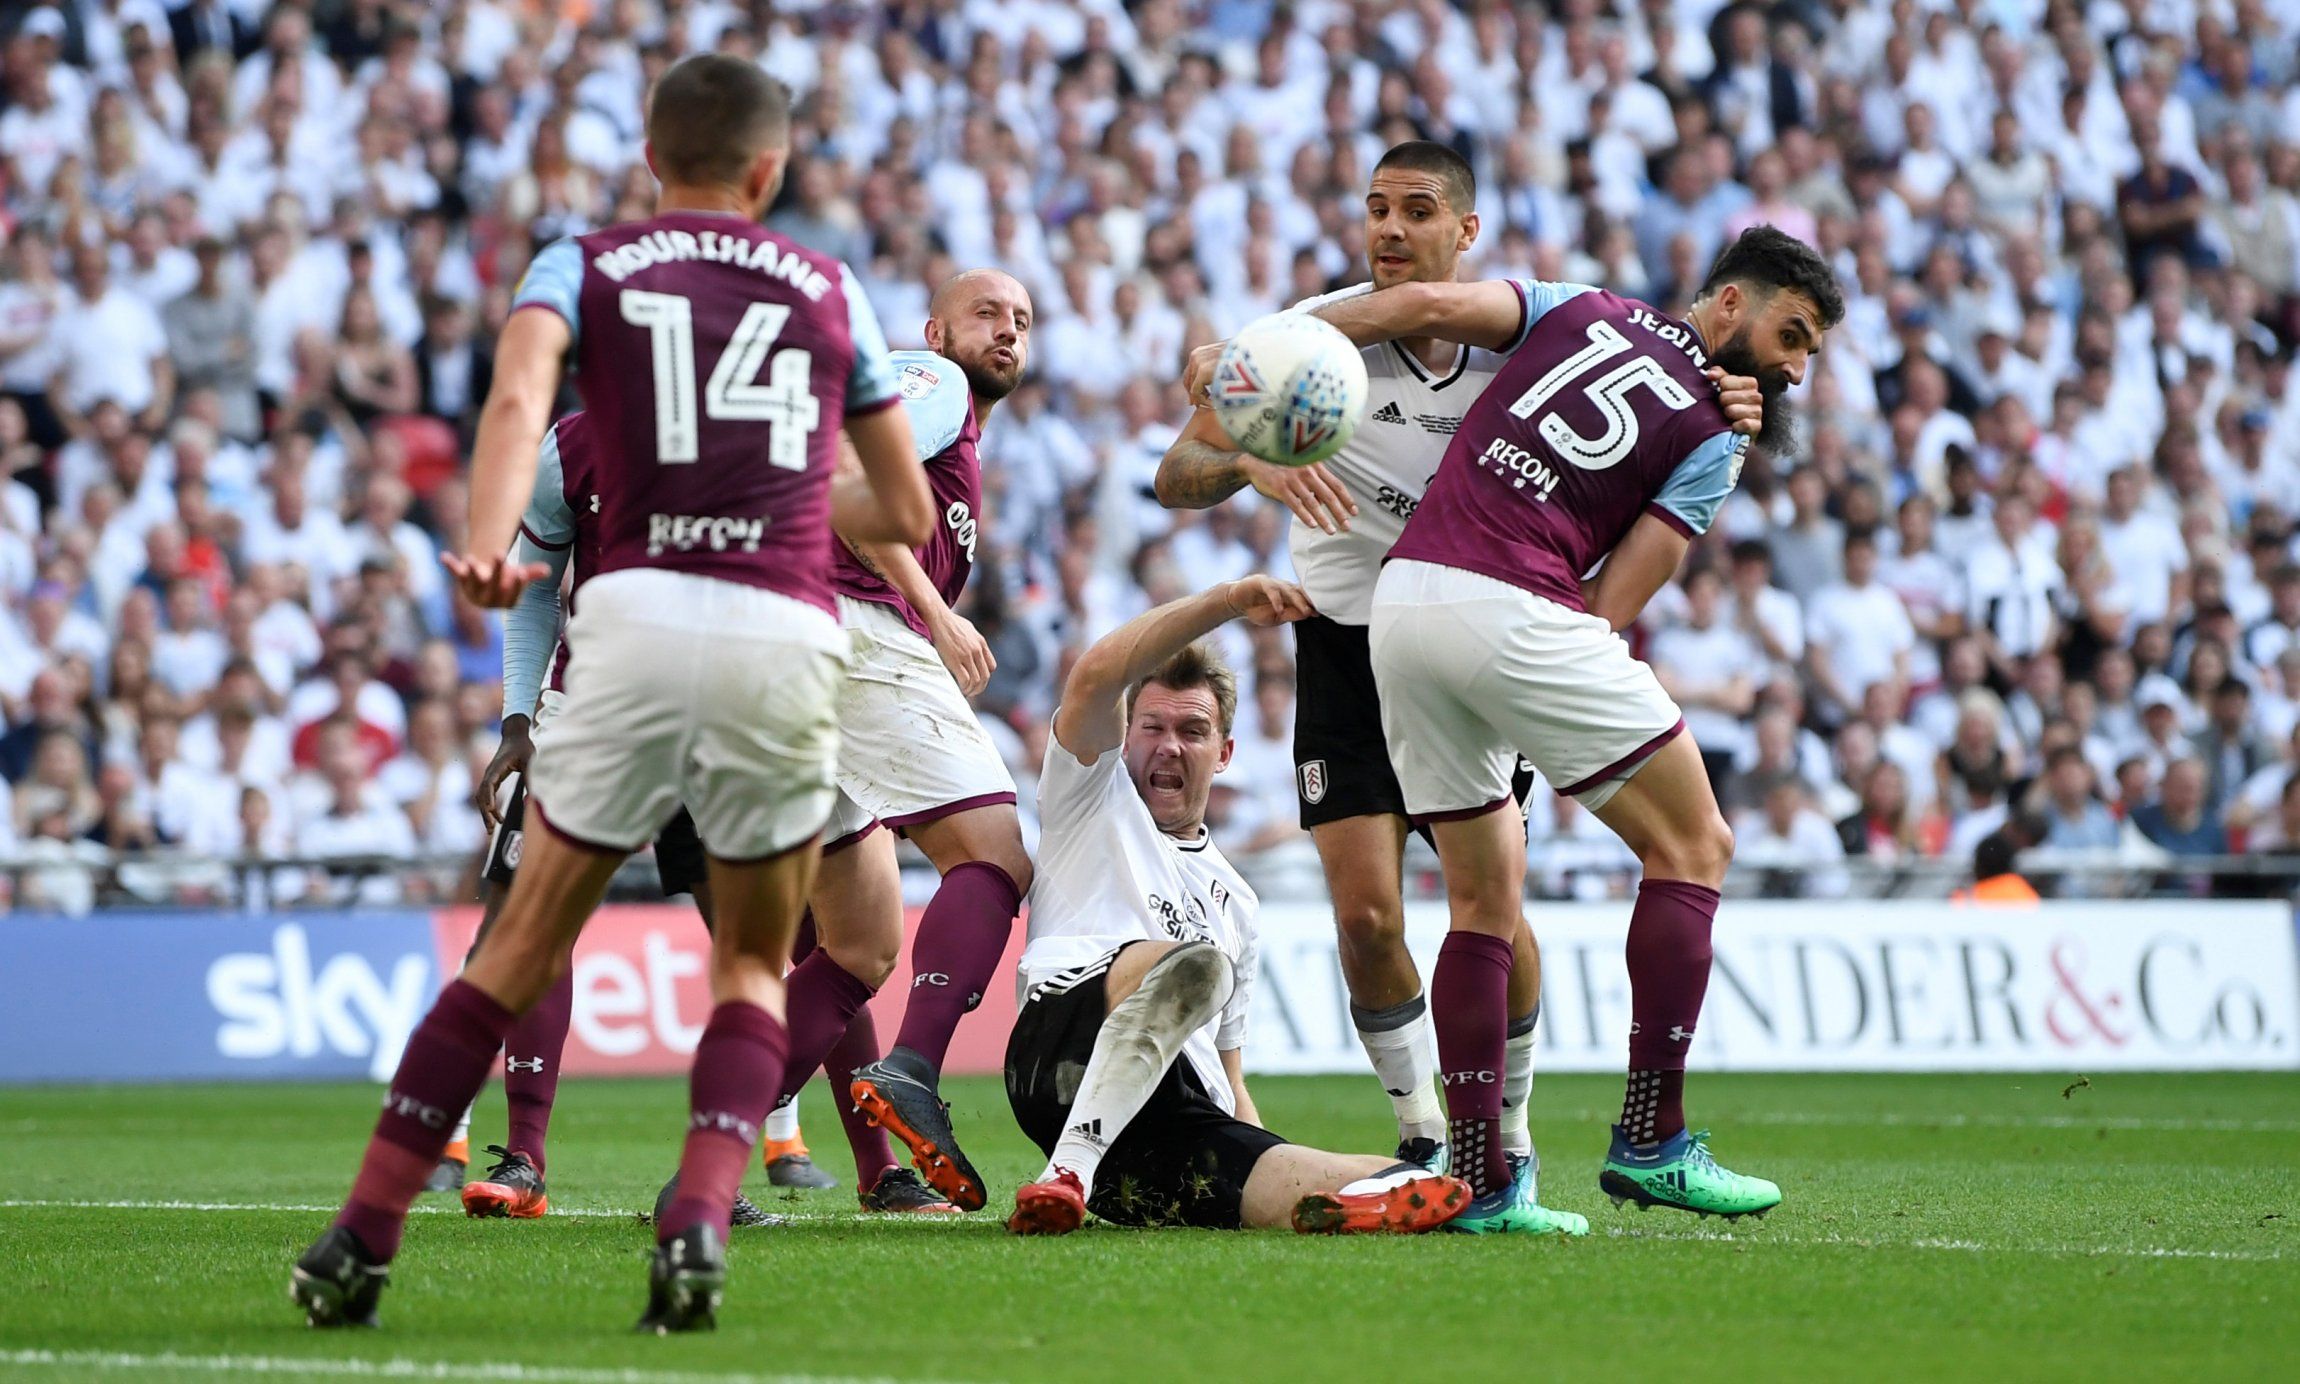 Aston Villa v Fulham in the play off Championship final 2017/18.